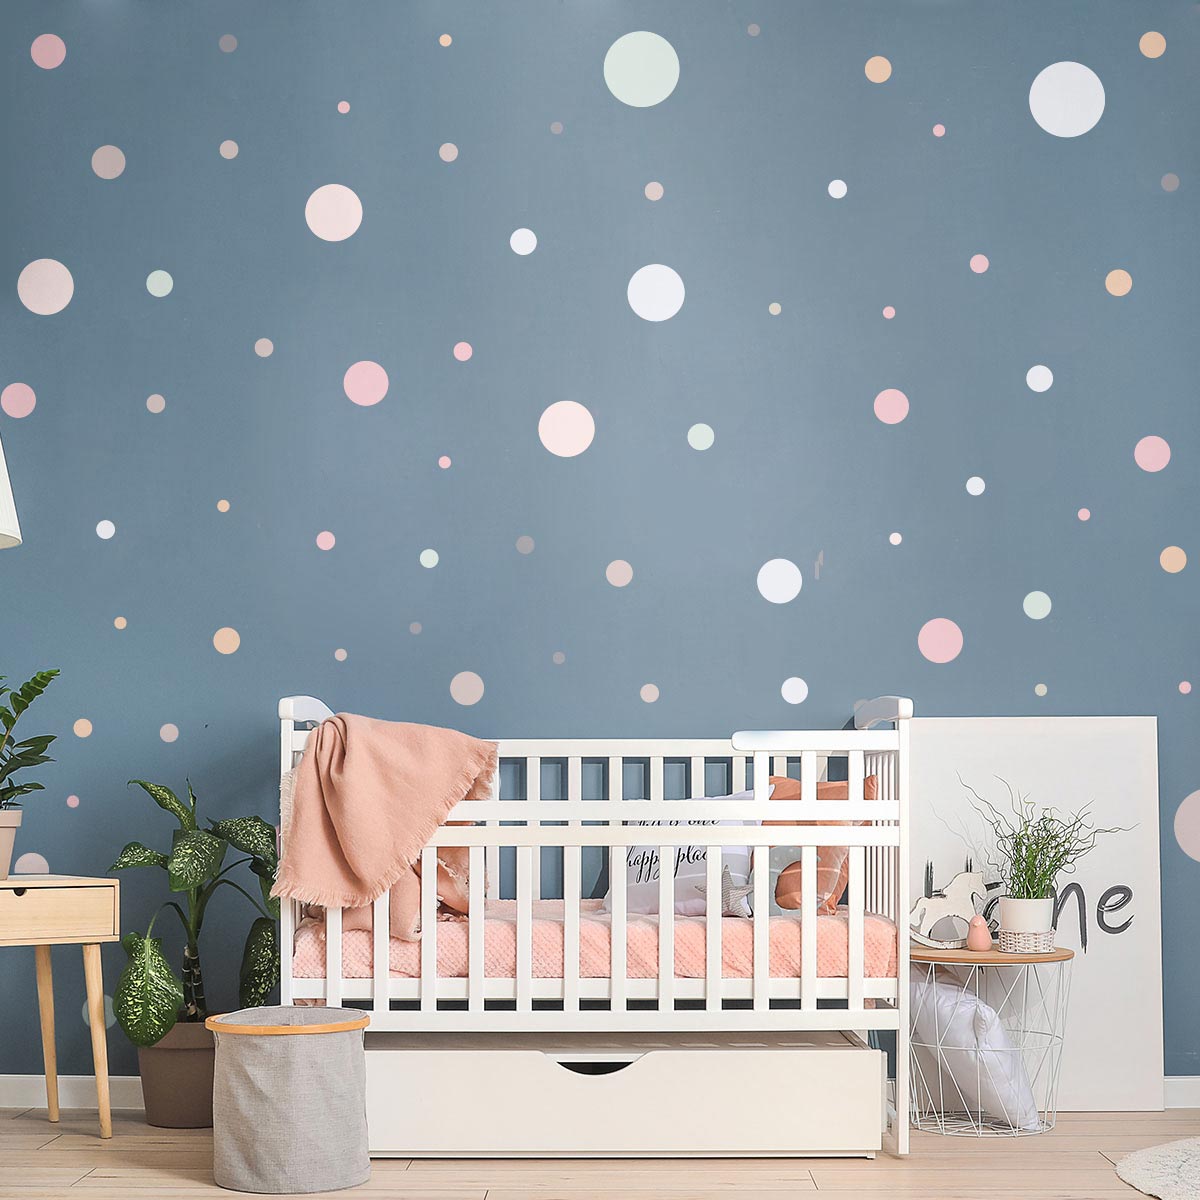 120 wall decals pastels multicolored rounds